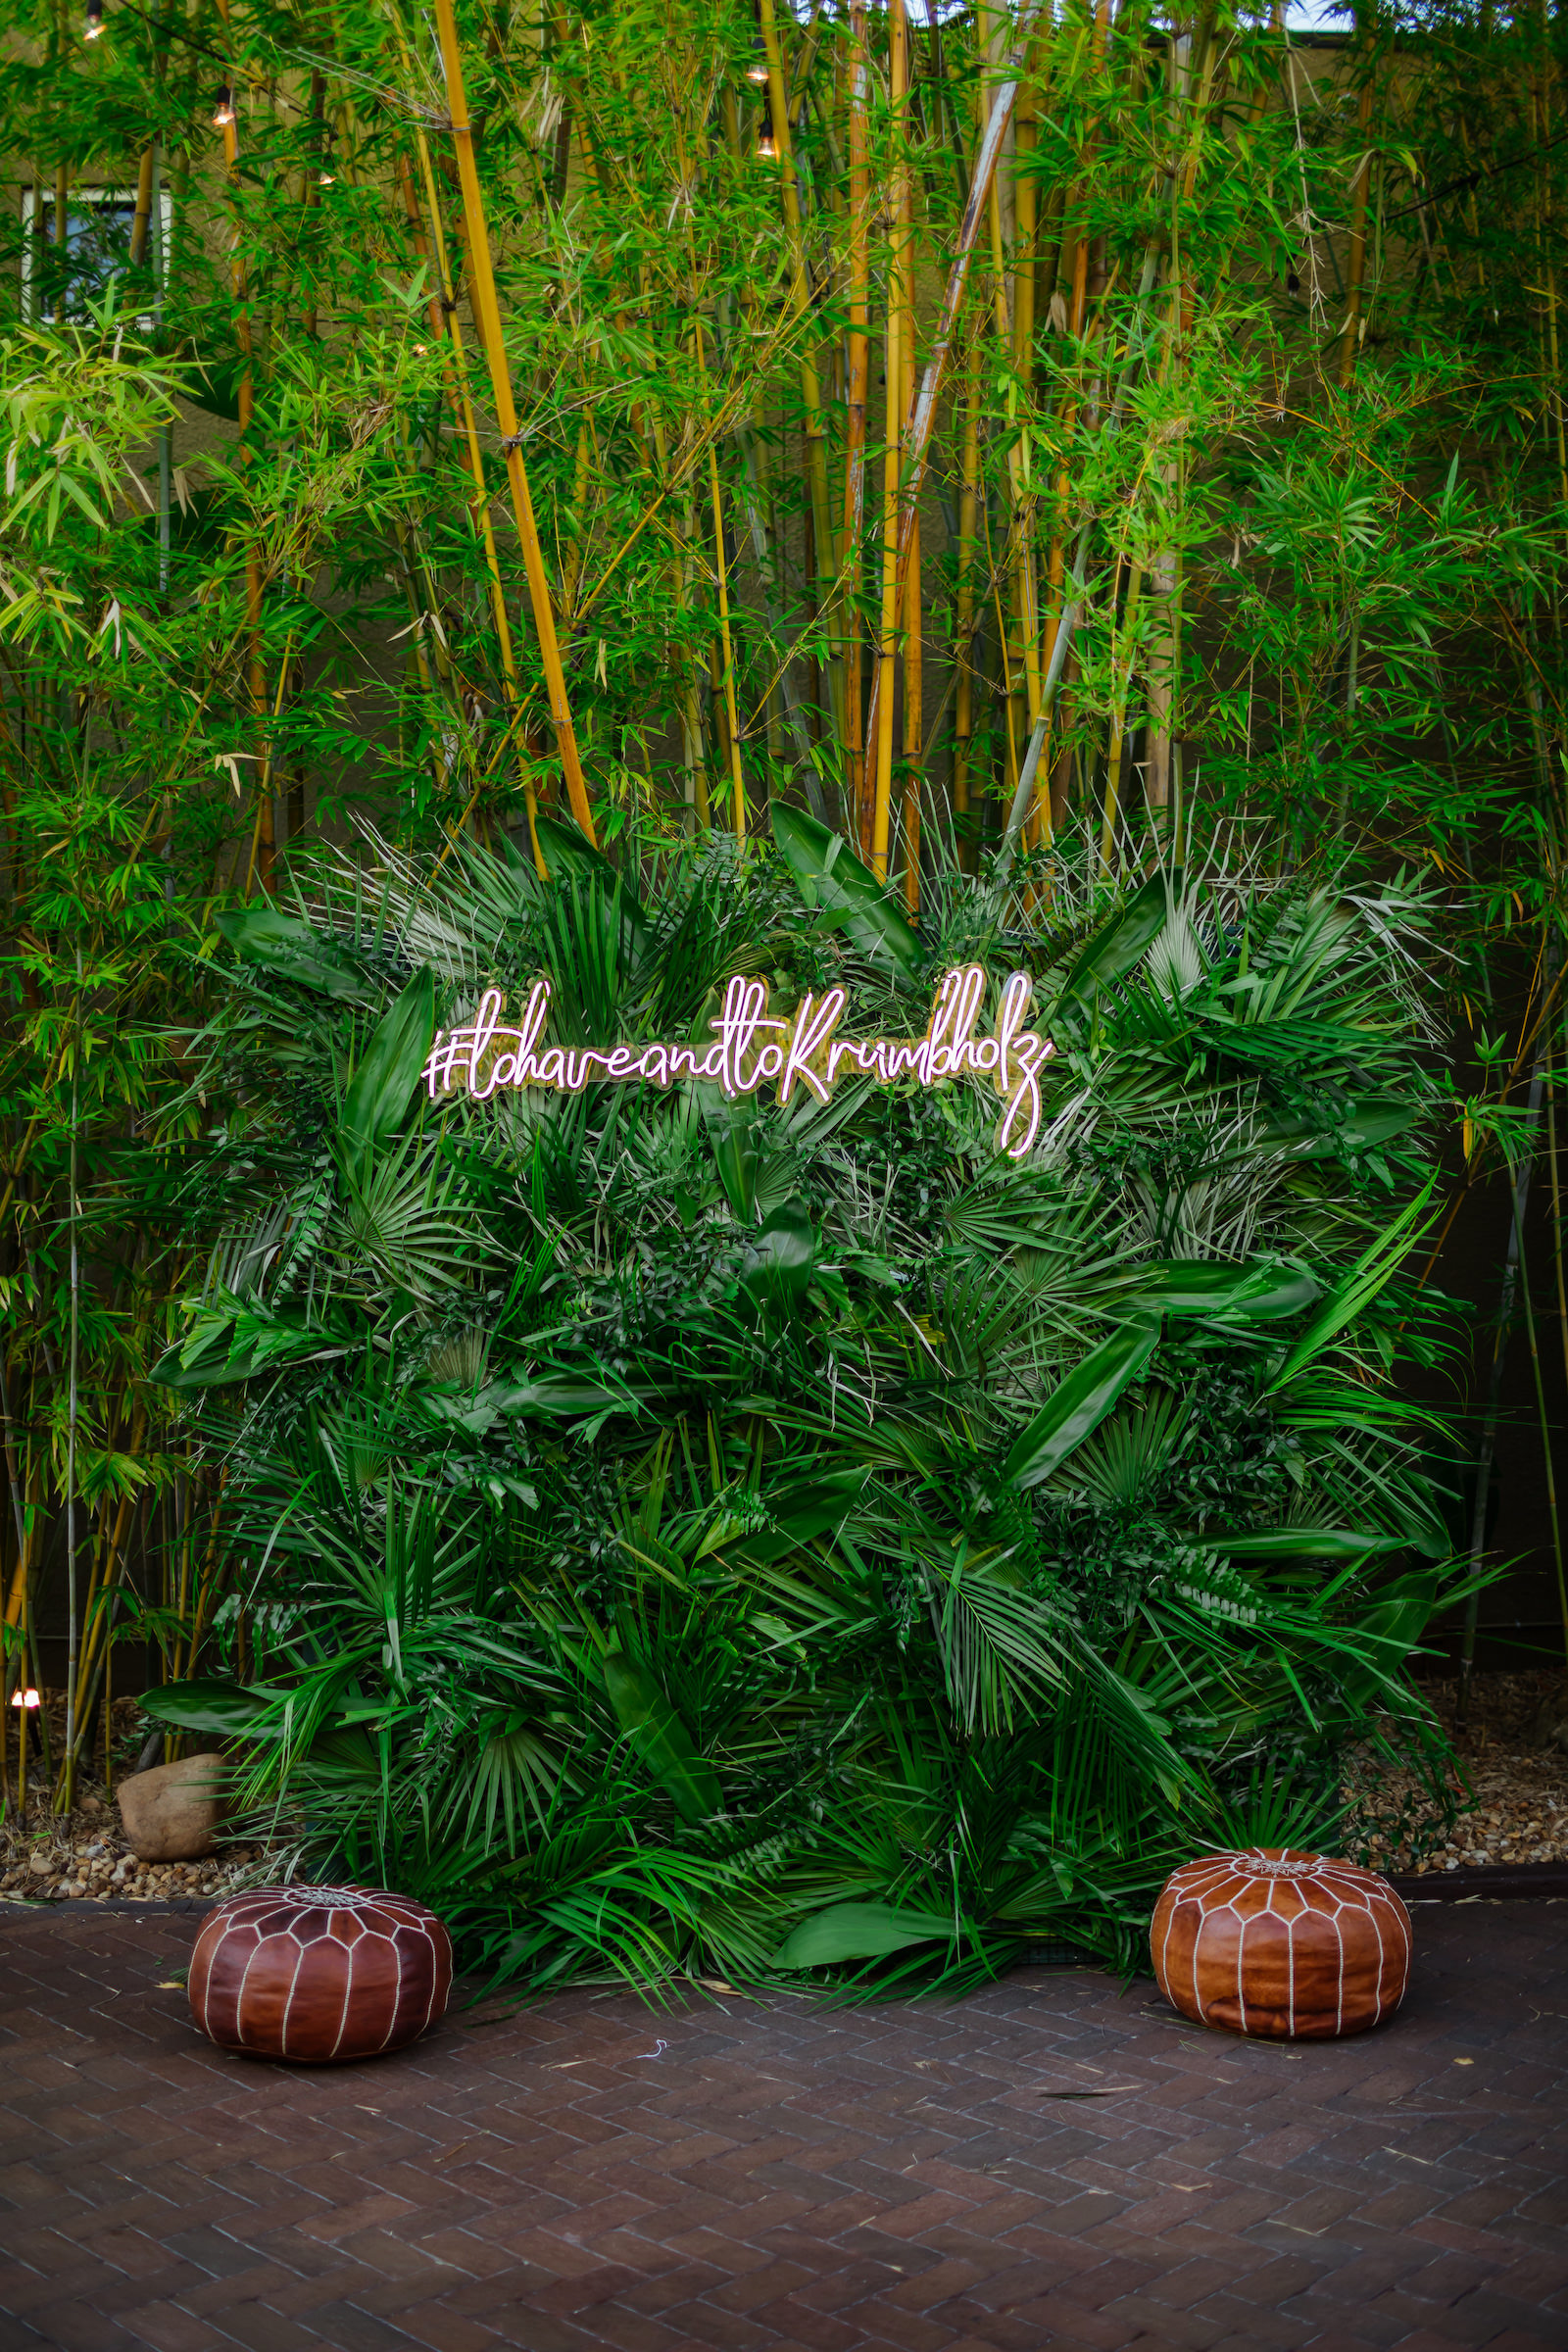 Tropical Inspired Florida Wedding Reception and Decor, Custom Photo Spot of Greenery and Palm Leaves with Custom Hashtag Neon Sign in Bamboo Courtyard | Unique Tampa Bay Wedding Venue NOVA 535 in Downtown St. Pete